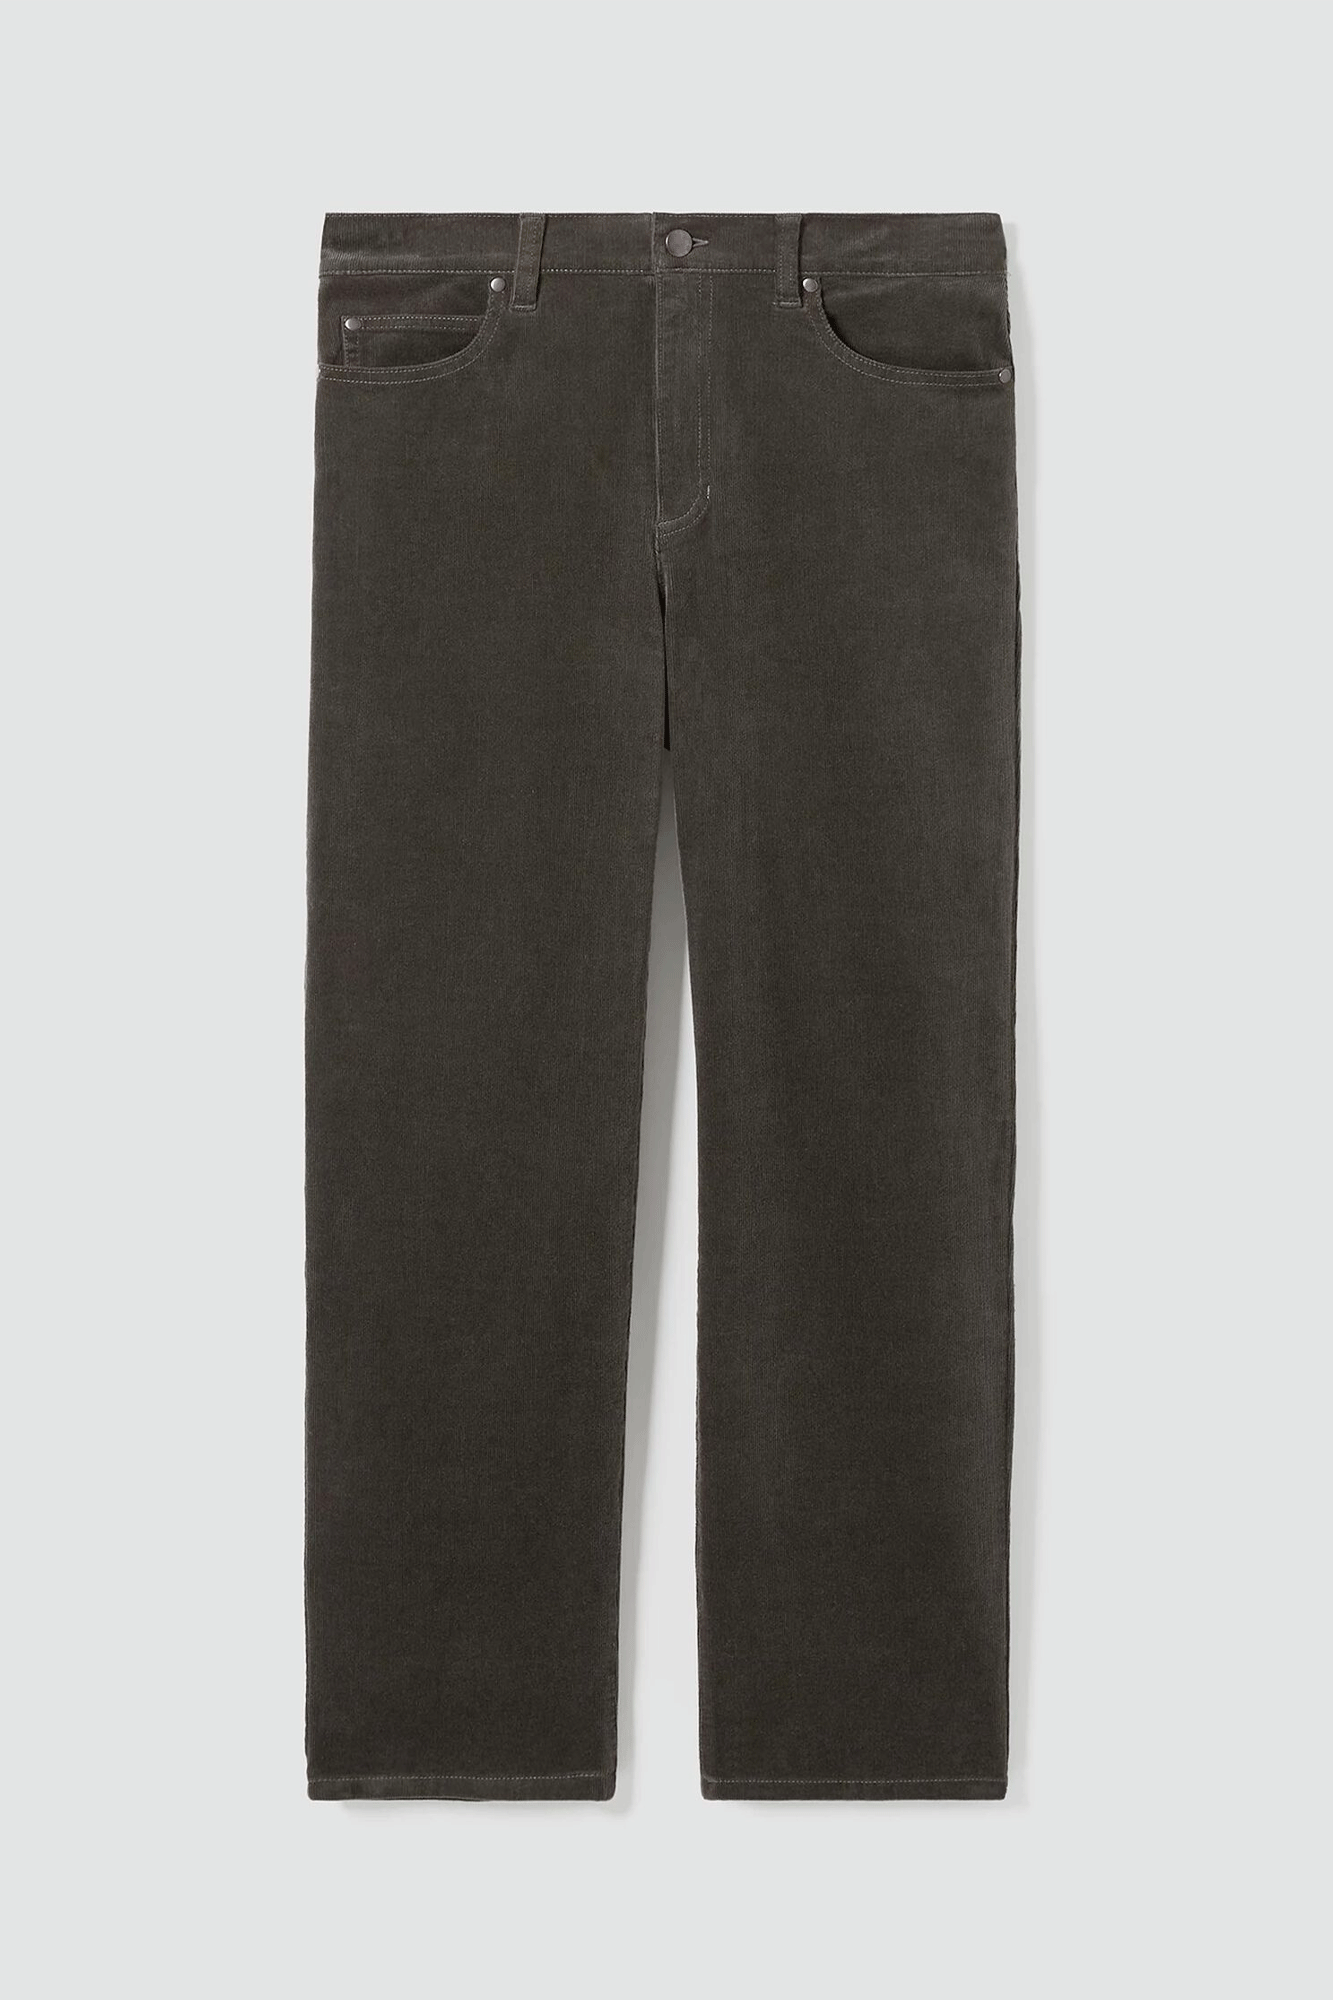 The High Waist Straight Ankle Jean from Eileen Fisher is designed with the perfect combination of style and comfort in mind. It's made with velvety corduroy crafted from organic cotton and features subtle stretch for a custom fit. Its straight leg cut pairs perfectly with any look, whether it's dressy or casual.